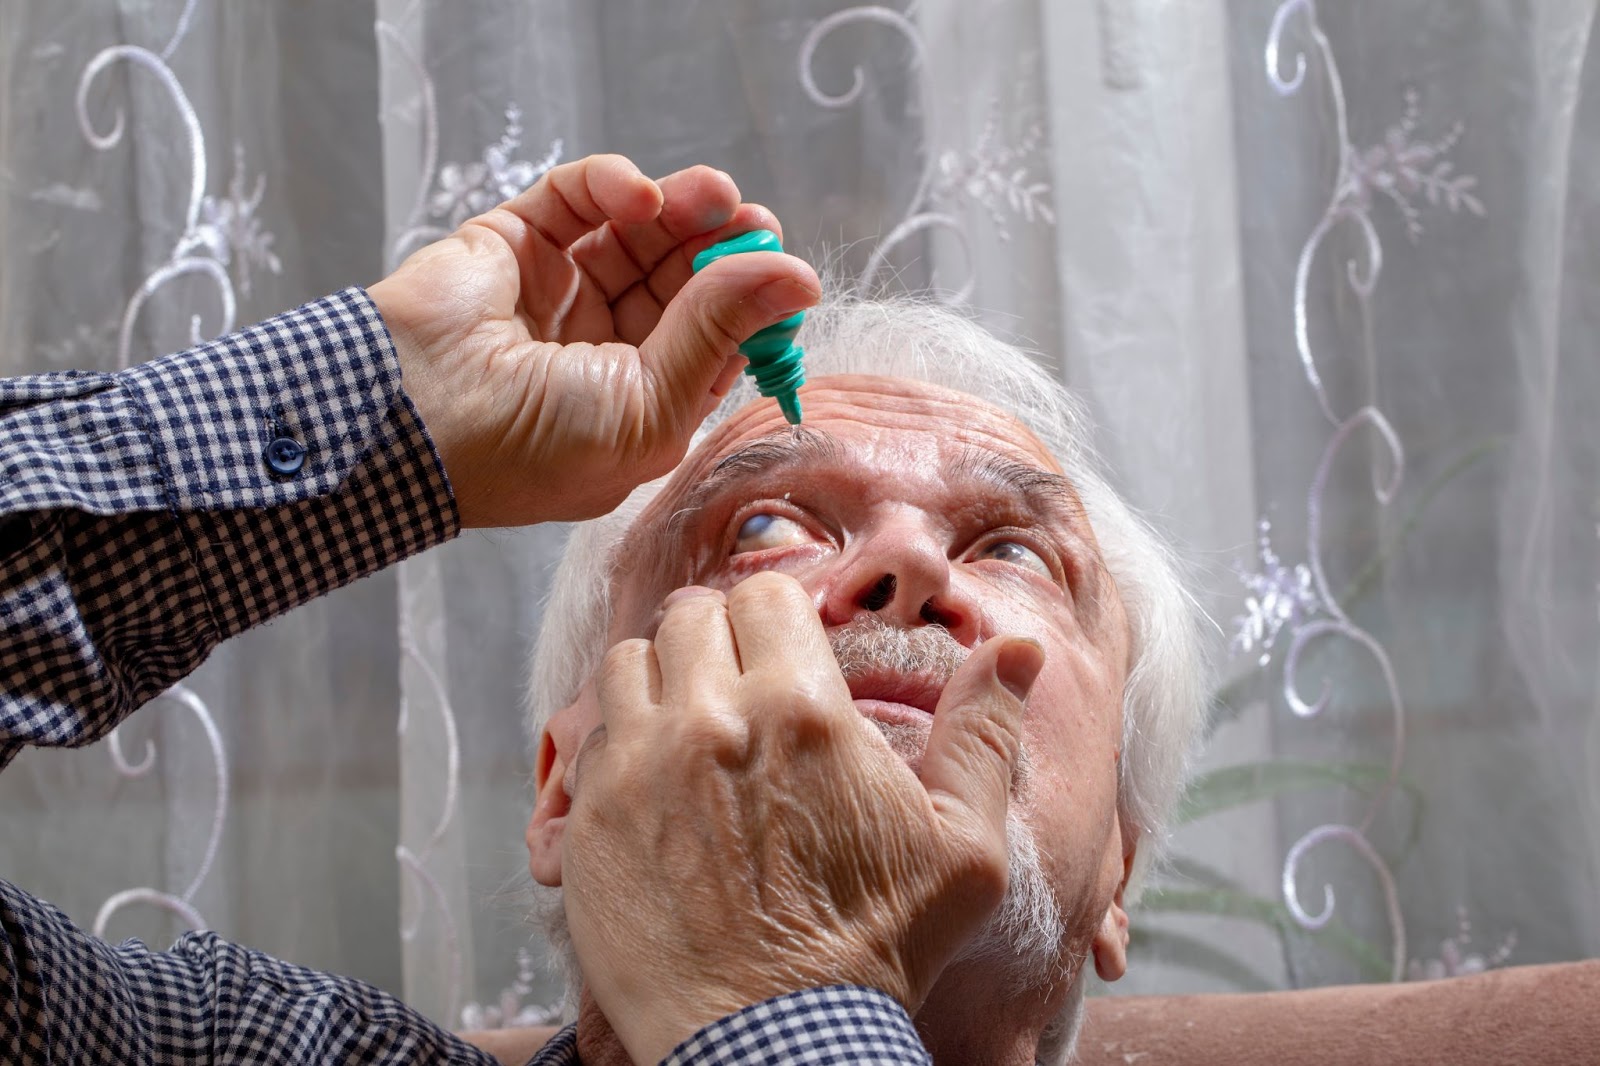 An older adult tilts his head back while pulling his right lower eyelid down with his left hand and dispensing eye drops with his right hand.